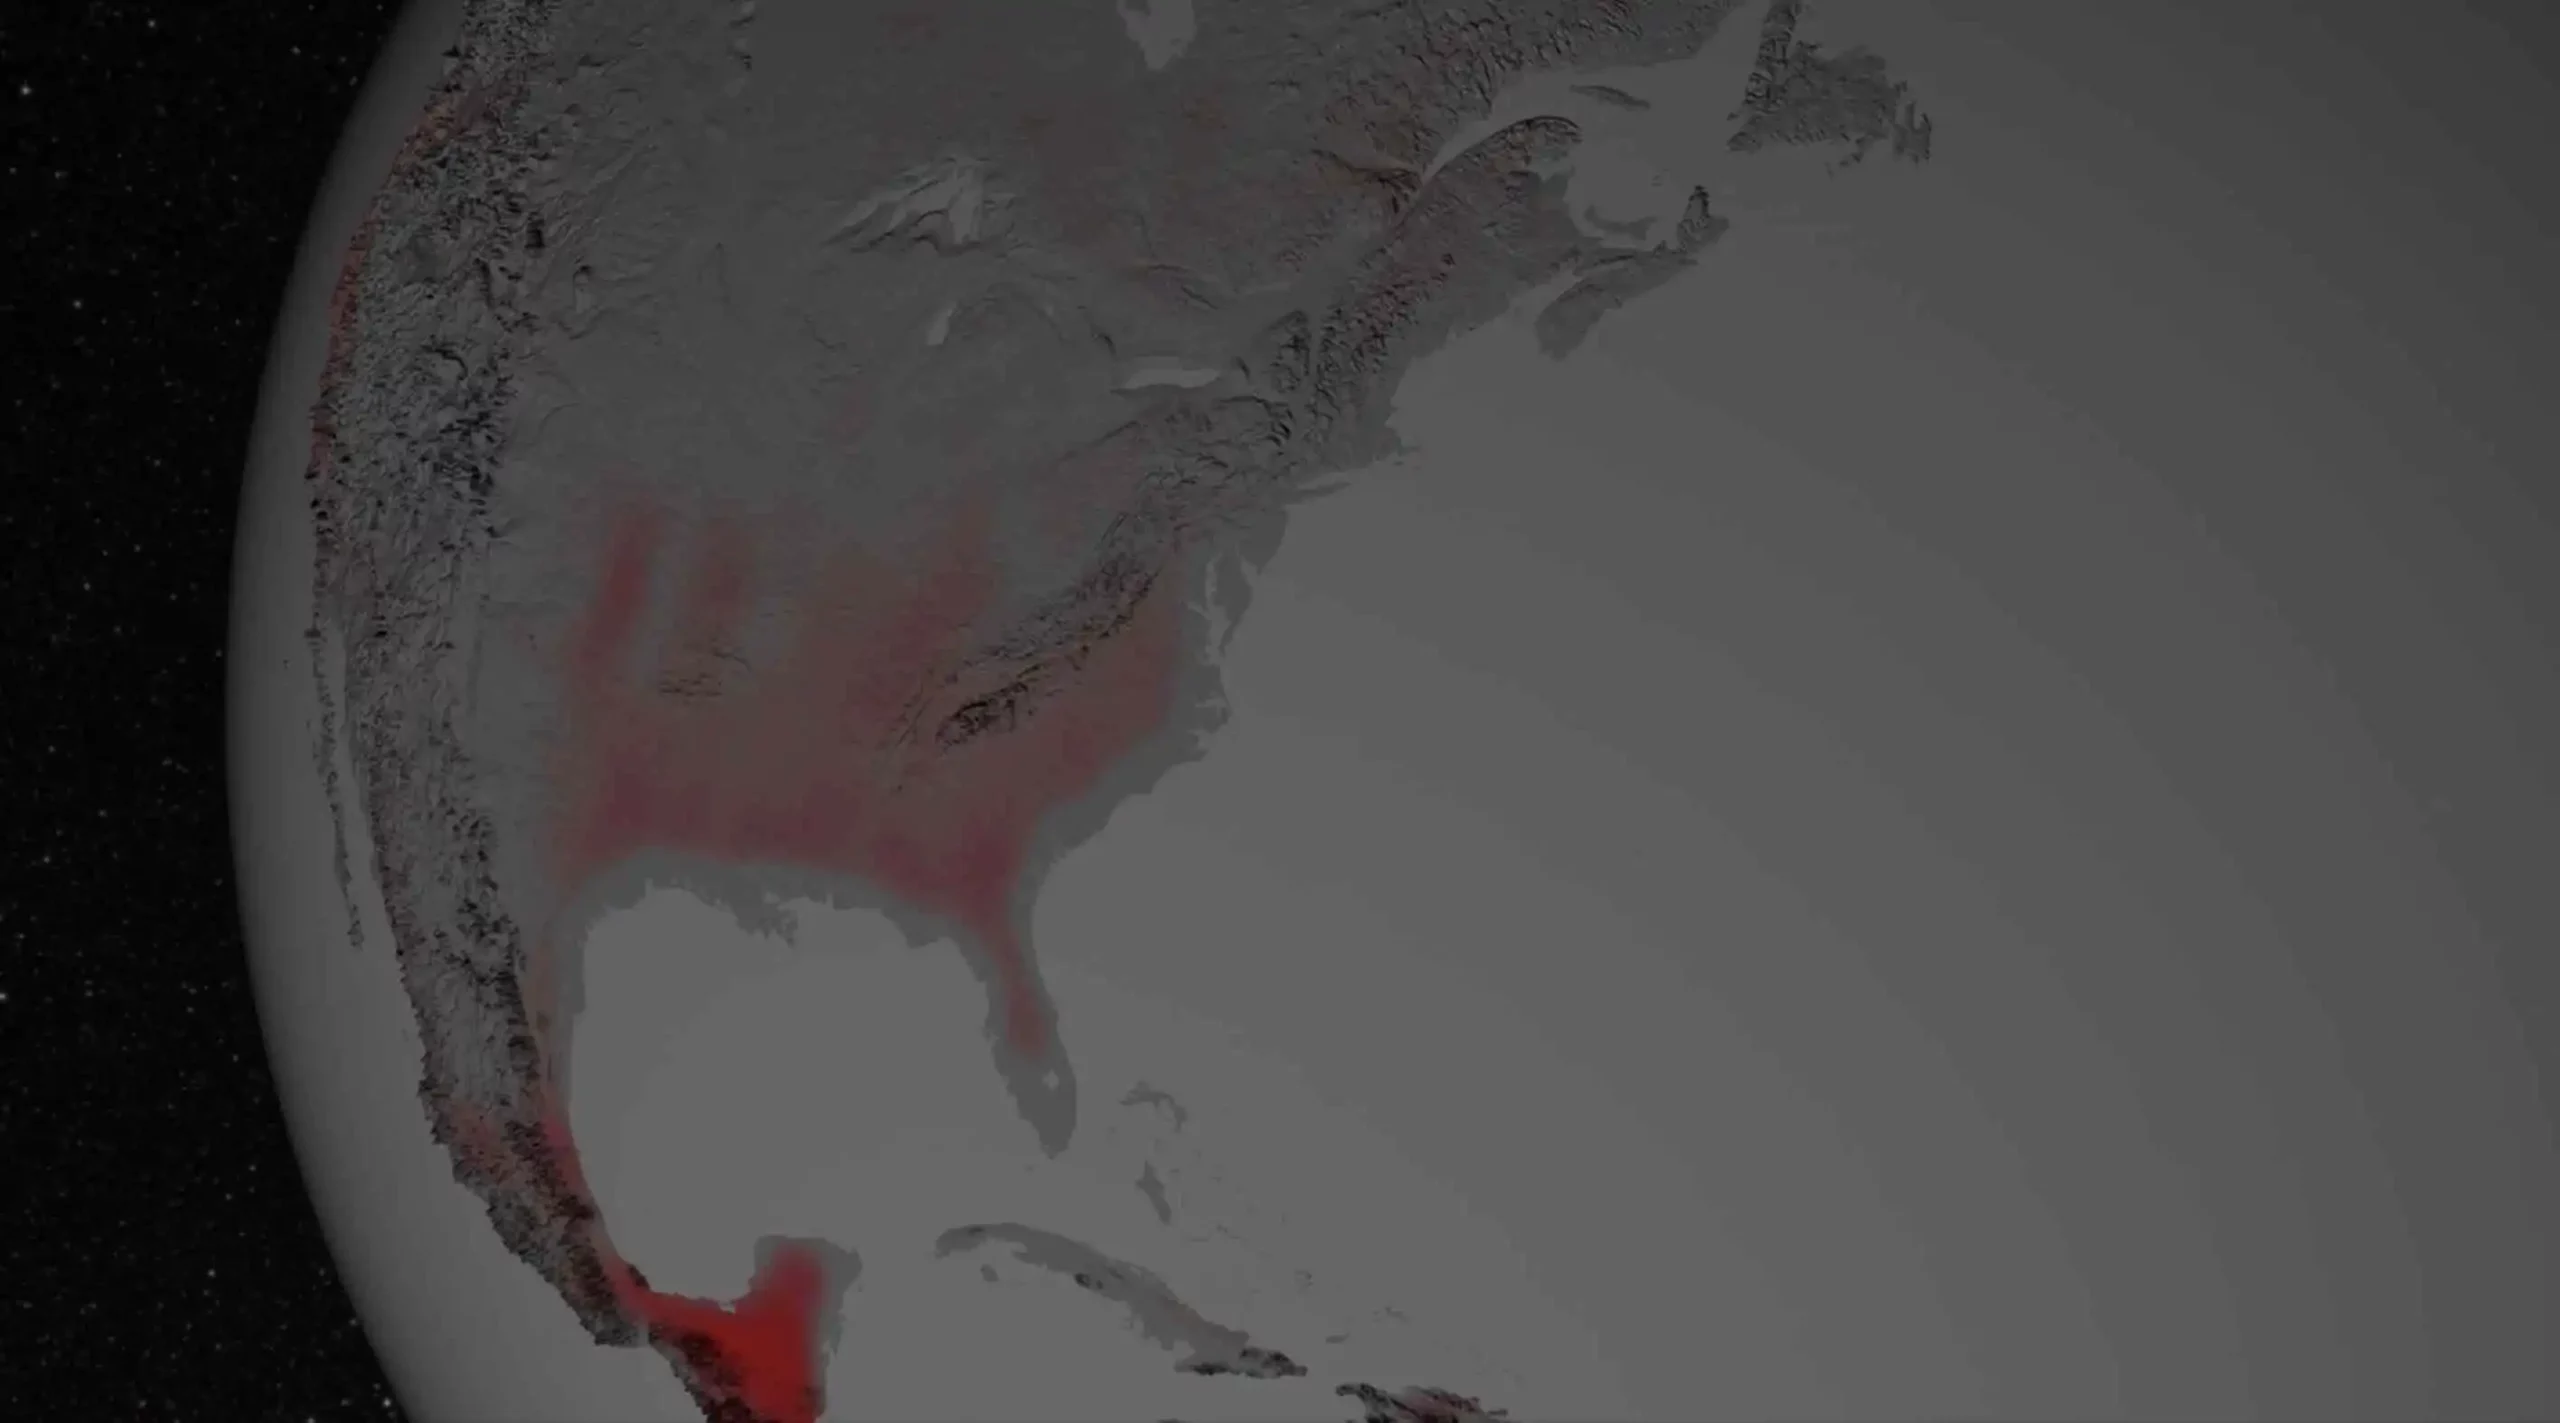 Image: Growing plants emit a form of light detectable by NASA satellites orbiting hundreds of miles above Earth. Parts of North America appear to glimmer in this visualization, depicting an average year. Gray indicates regions with little or no fluorescence; red, pink, and white indicate high fluorescence. Credit: NASA’s Scientific Visualization Studio